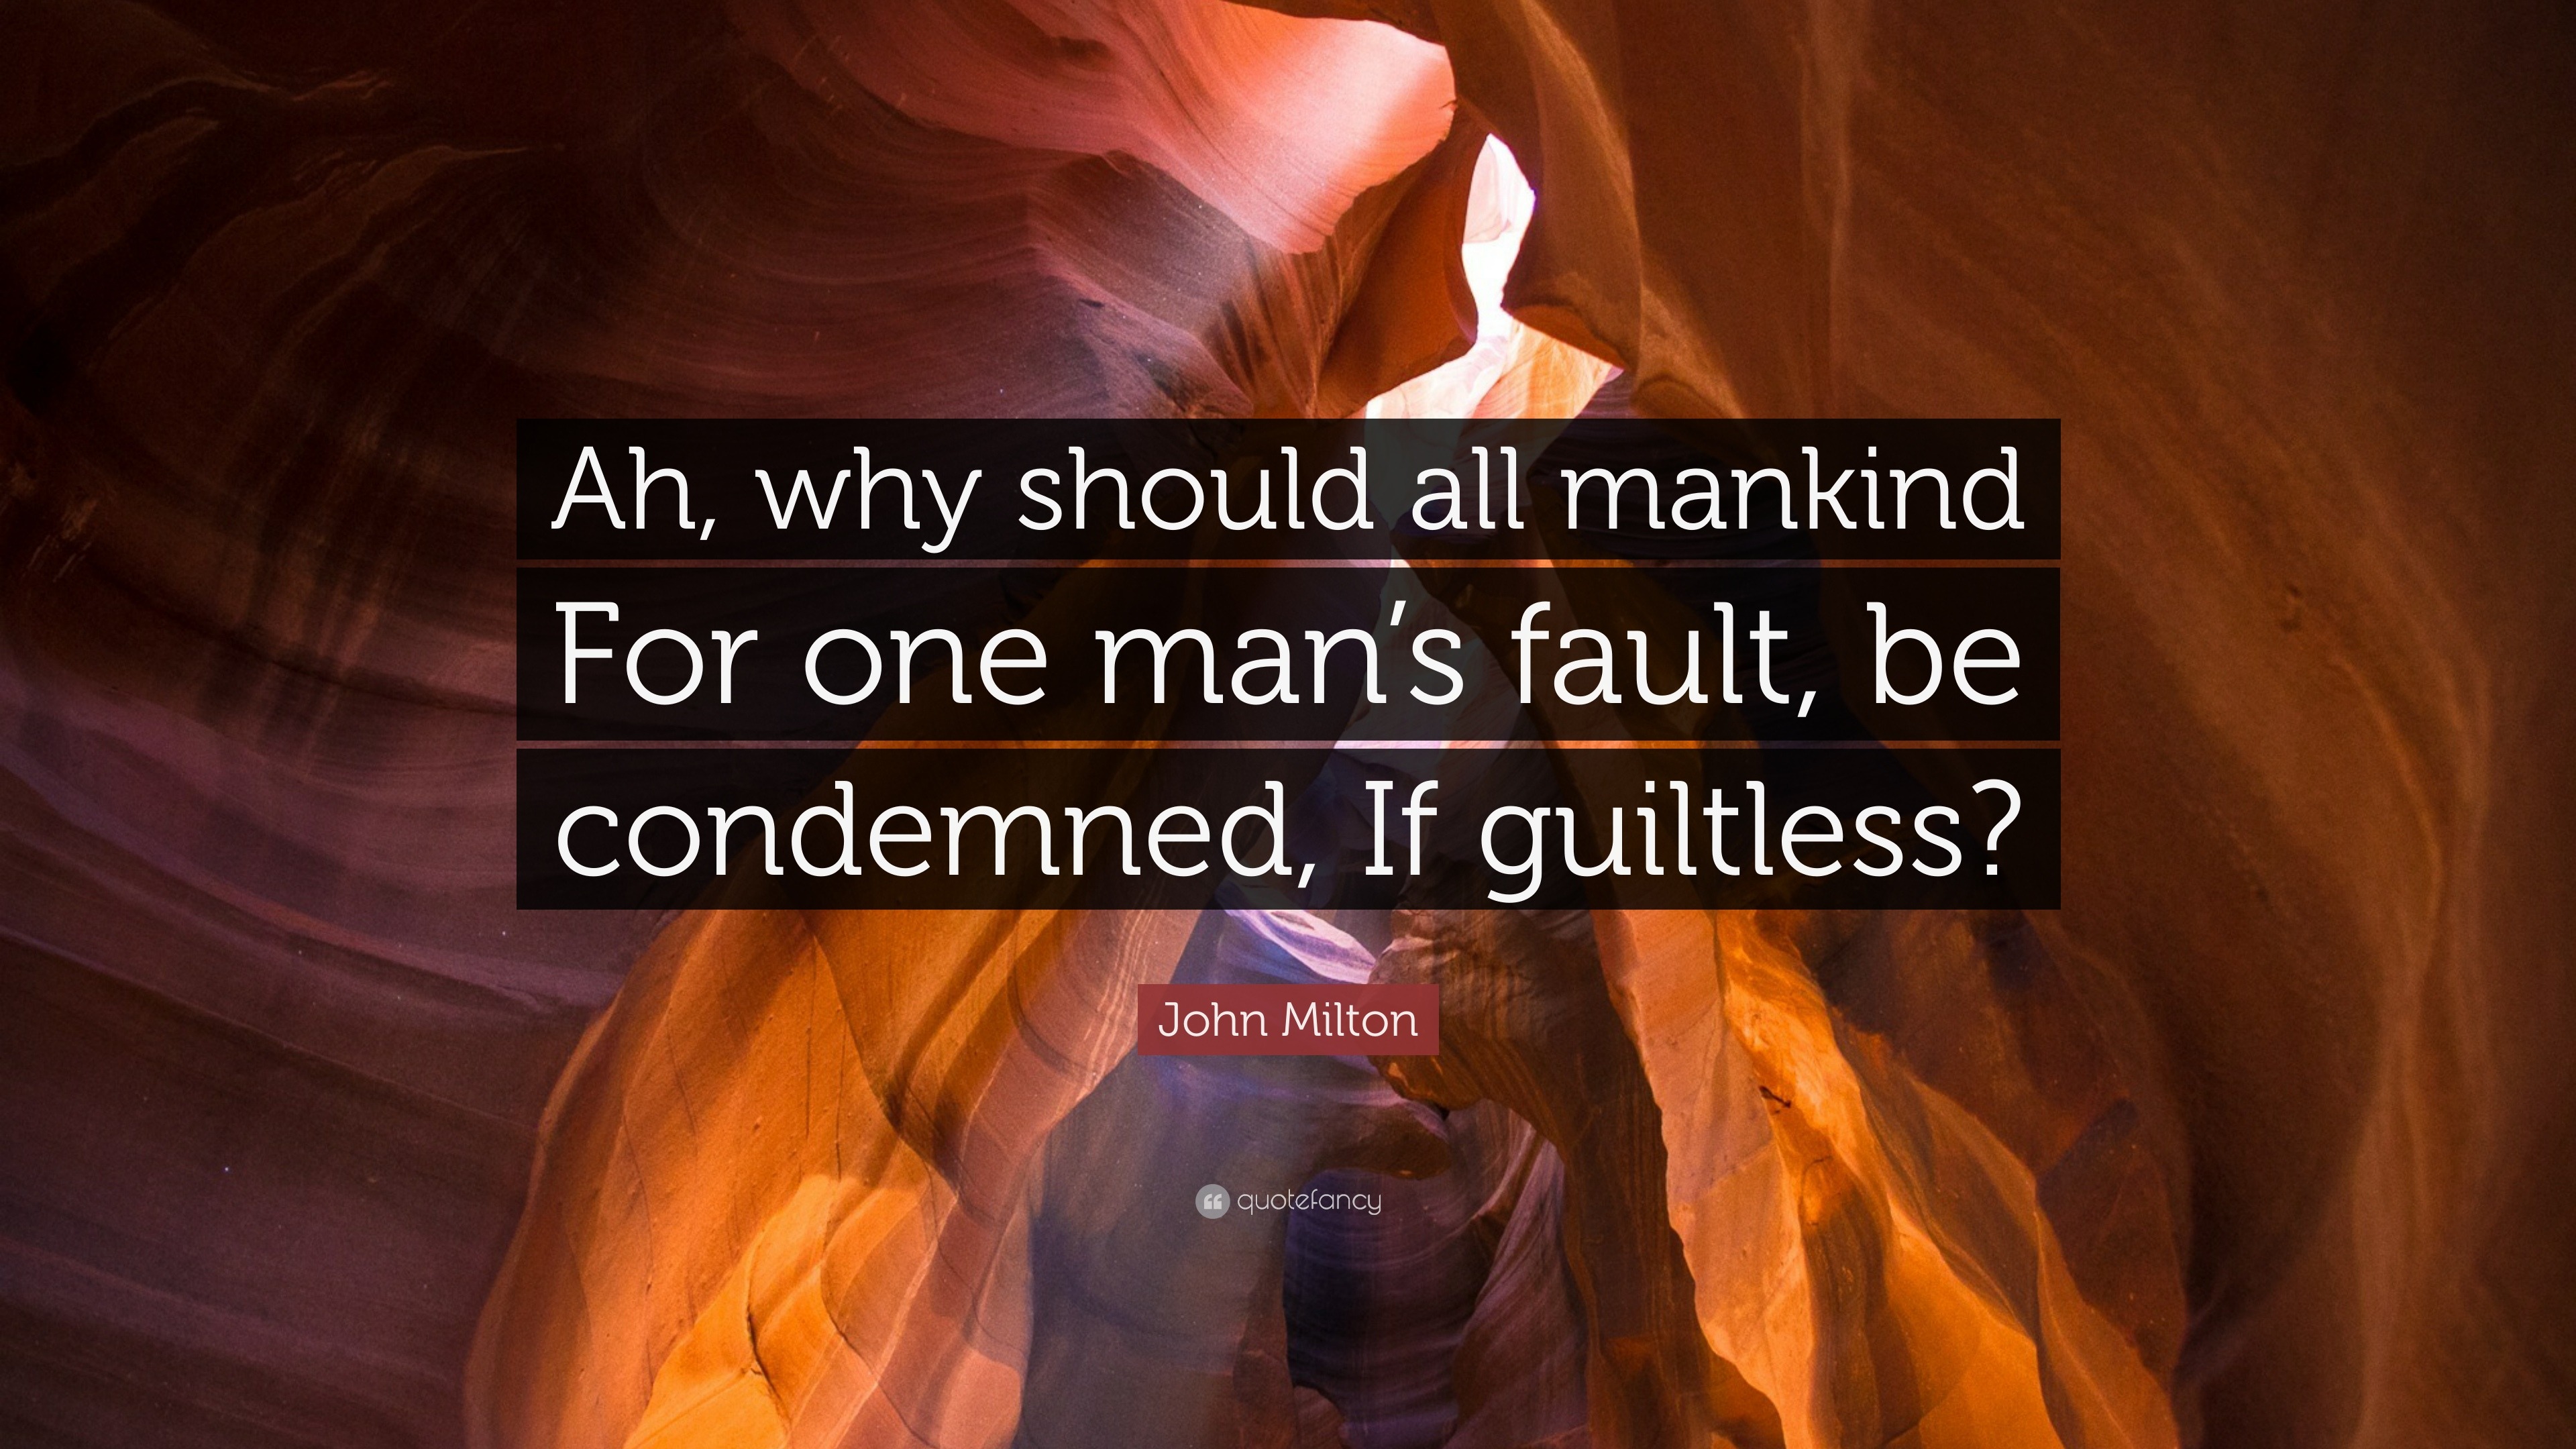 John Milton Quote: “Ah, why should all mankind For one man’s fault, be ...